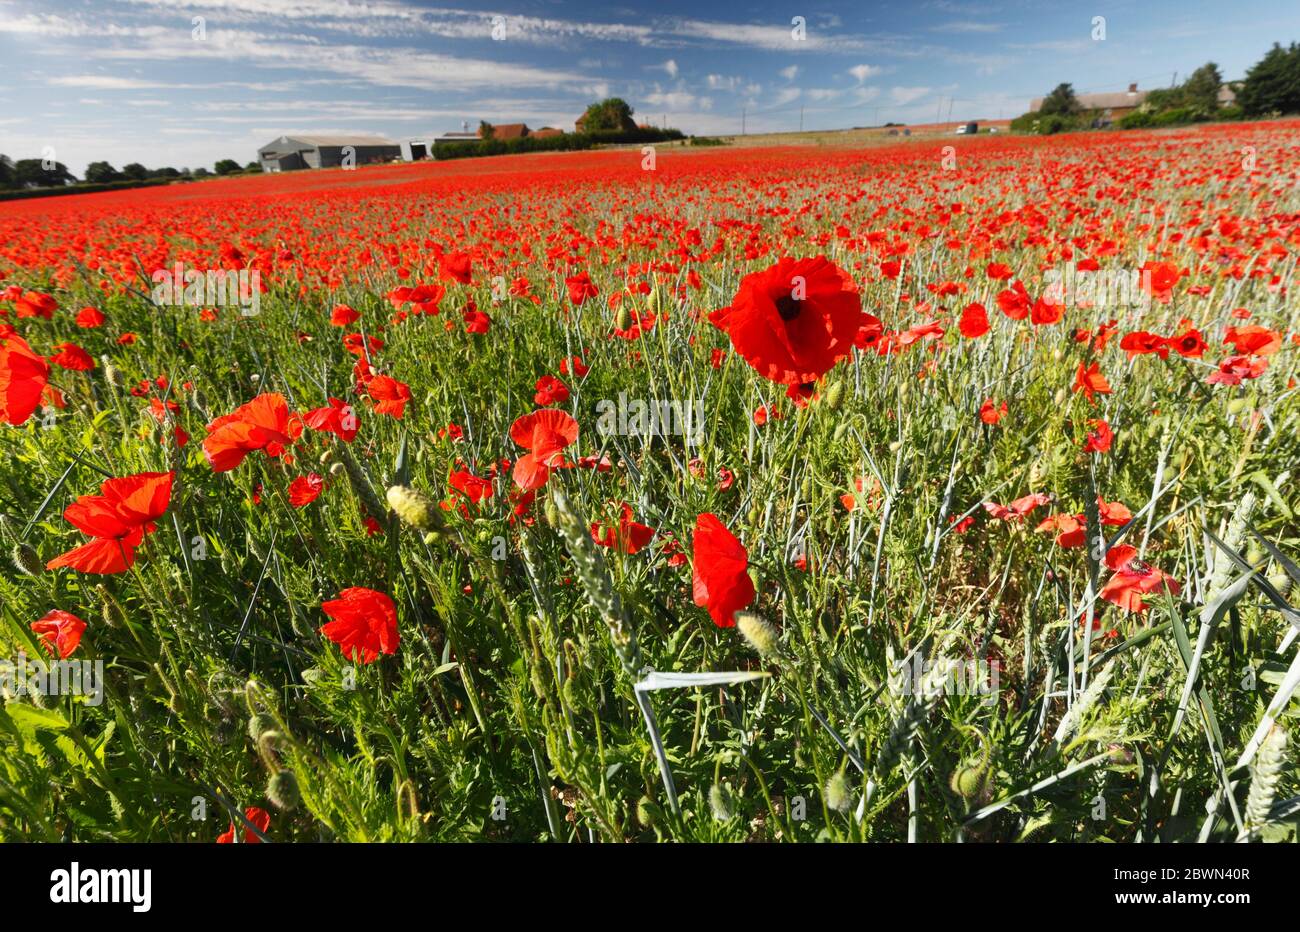 Heacham, Norfolk, England, UK. 2nd June 2020. A field full of red poppies in bloom in the sunshine. Credit: Stuart Aylmer/Alamy Live News Stock Photo